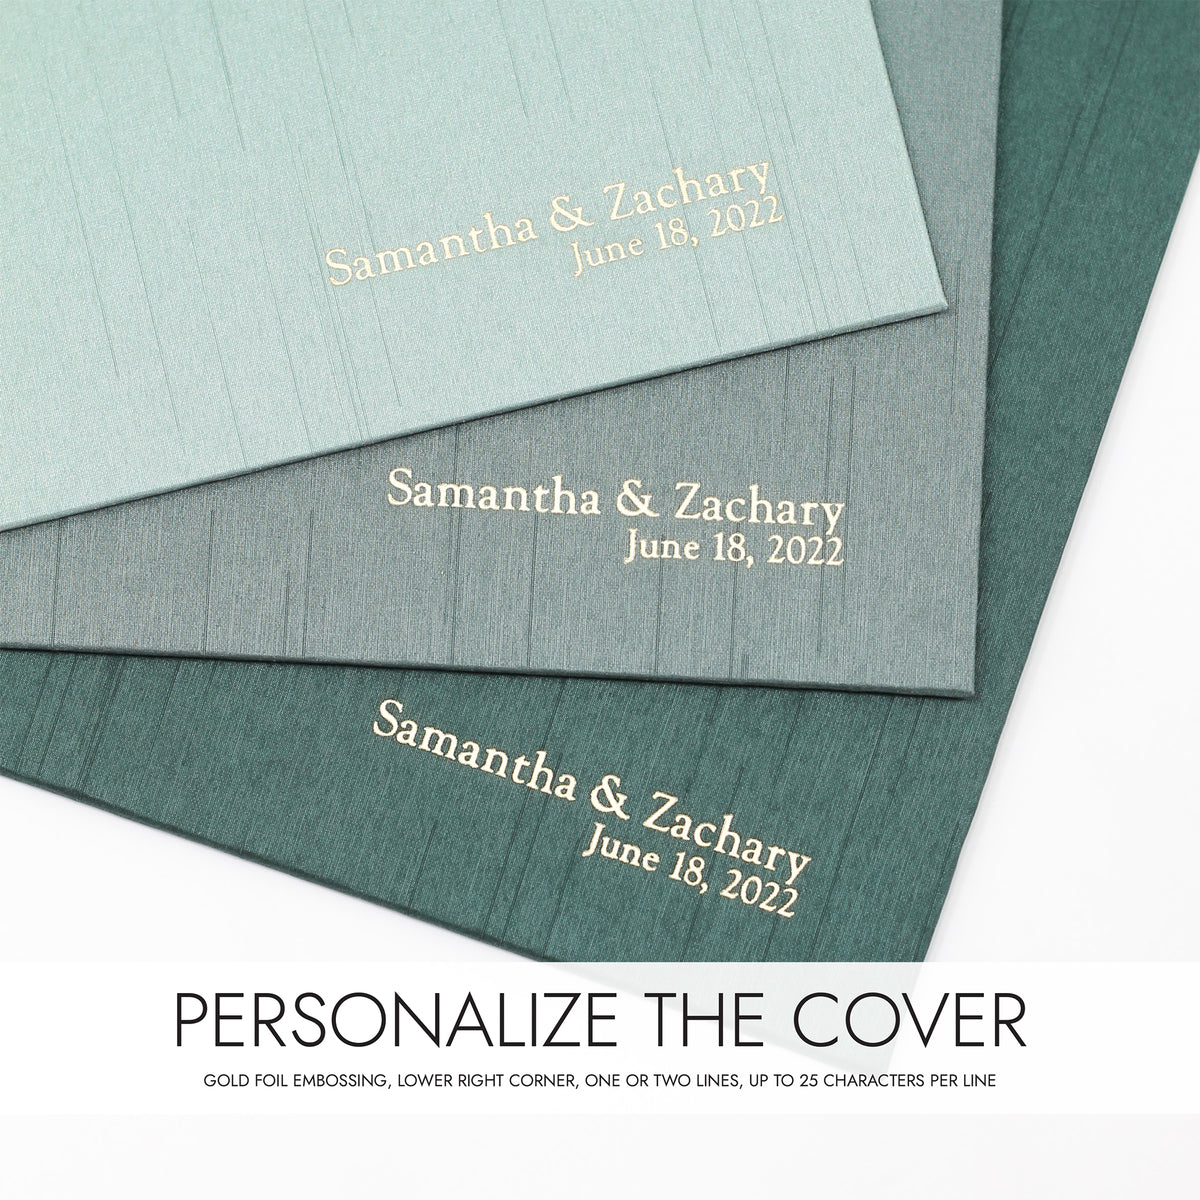 Large Photo Binder For 5x7 Photos | Cover: Teal Blue Silk | Available Personalized